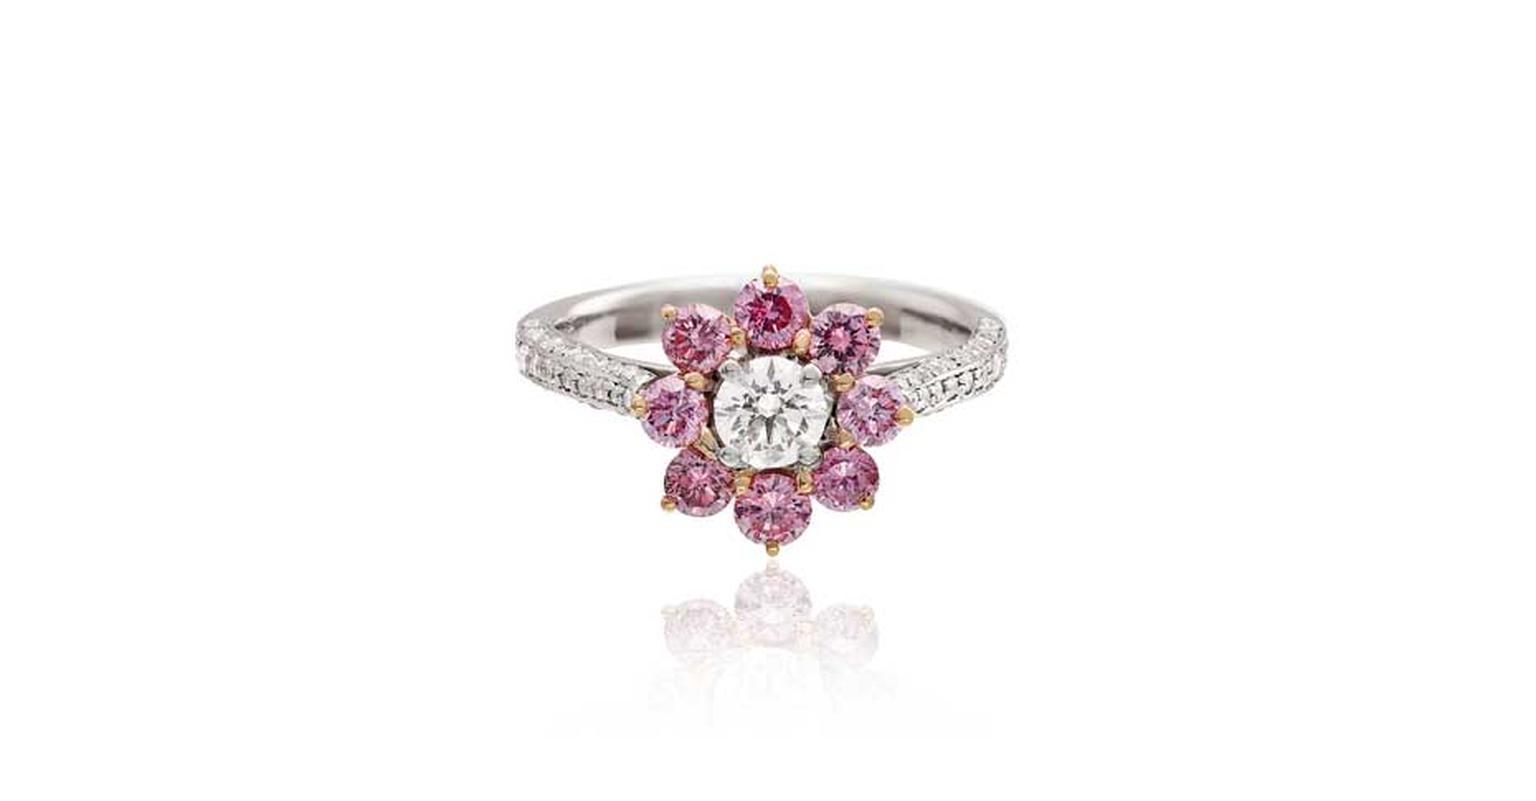 Linneys Argyle pink diamond ring in platinum and rose gold with white diamonds, available at www.linneys.com.au.